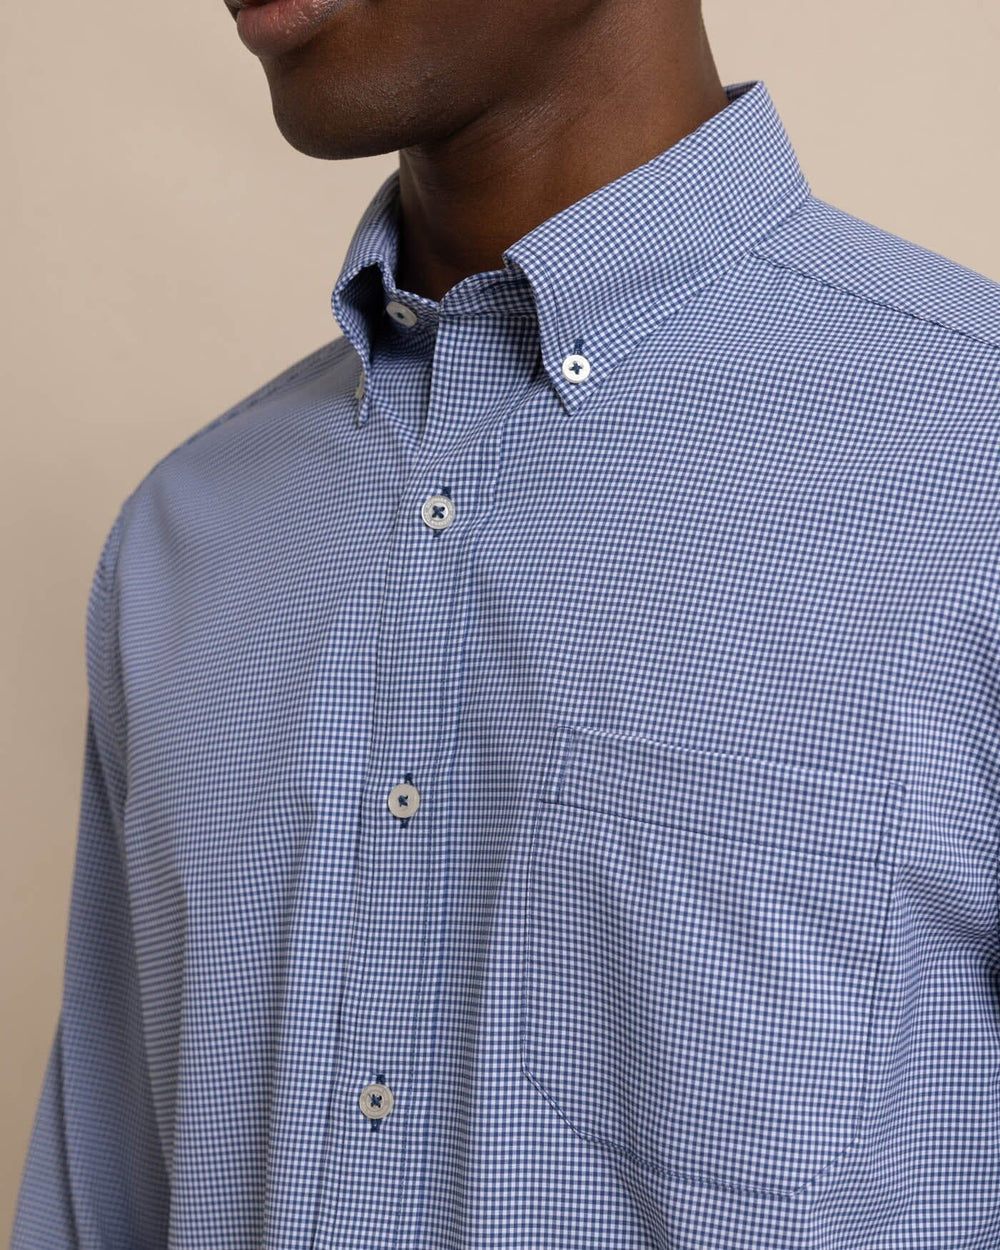 The front view of the Men's Micro Gingham Brrr Intercoastal Sport Shirt by Southern Tide - Seven Seas Blue